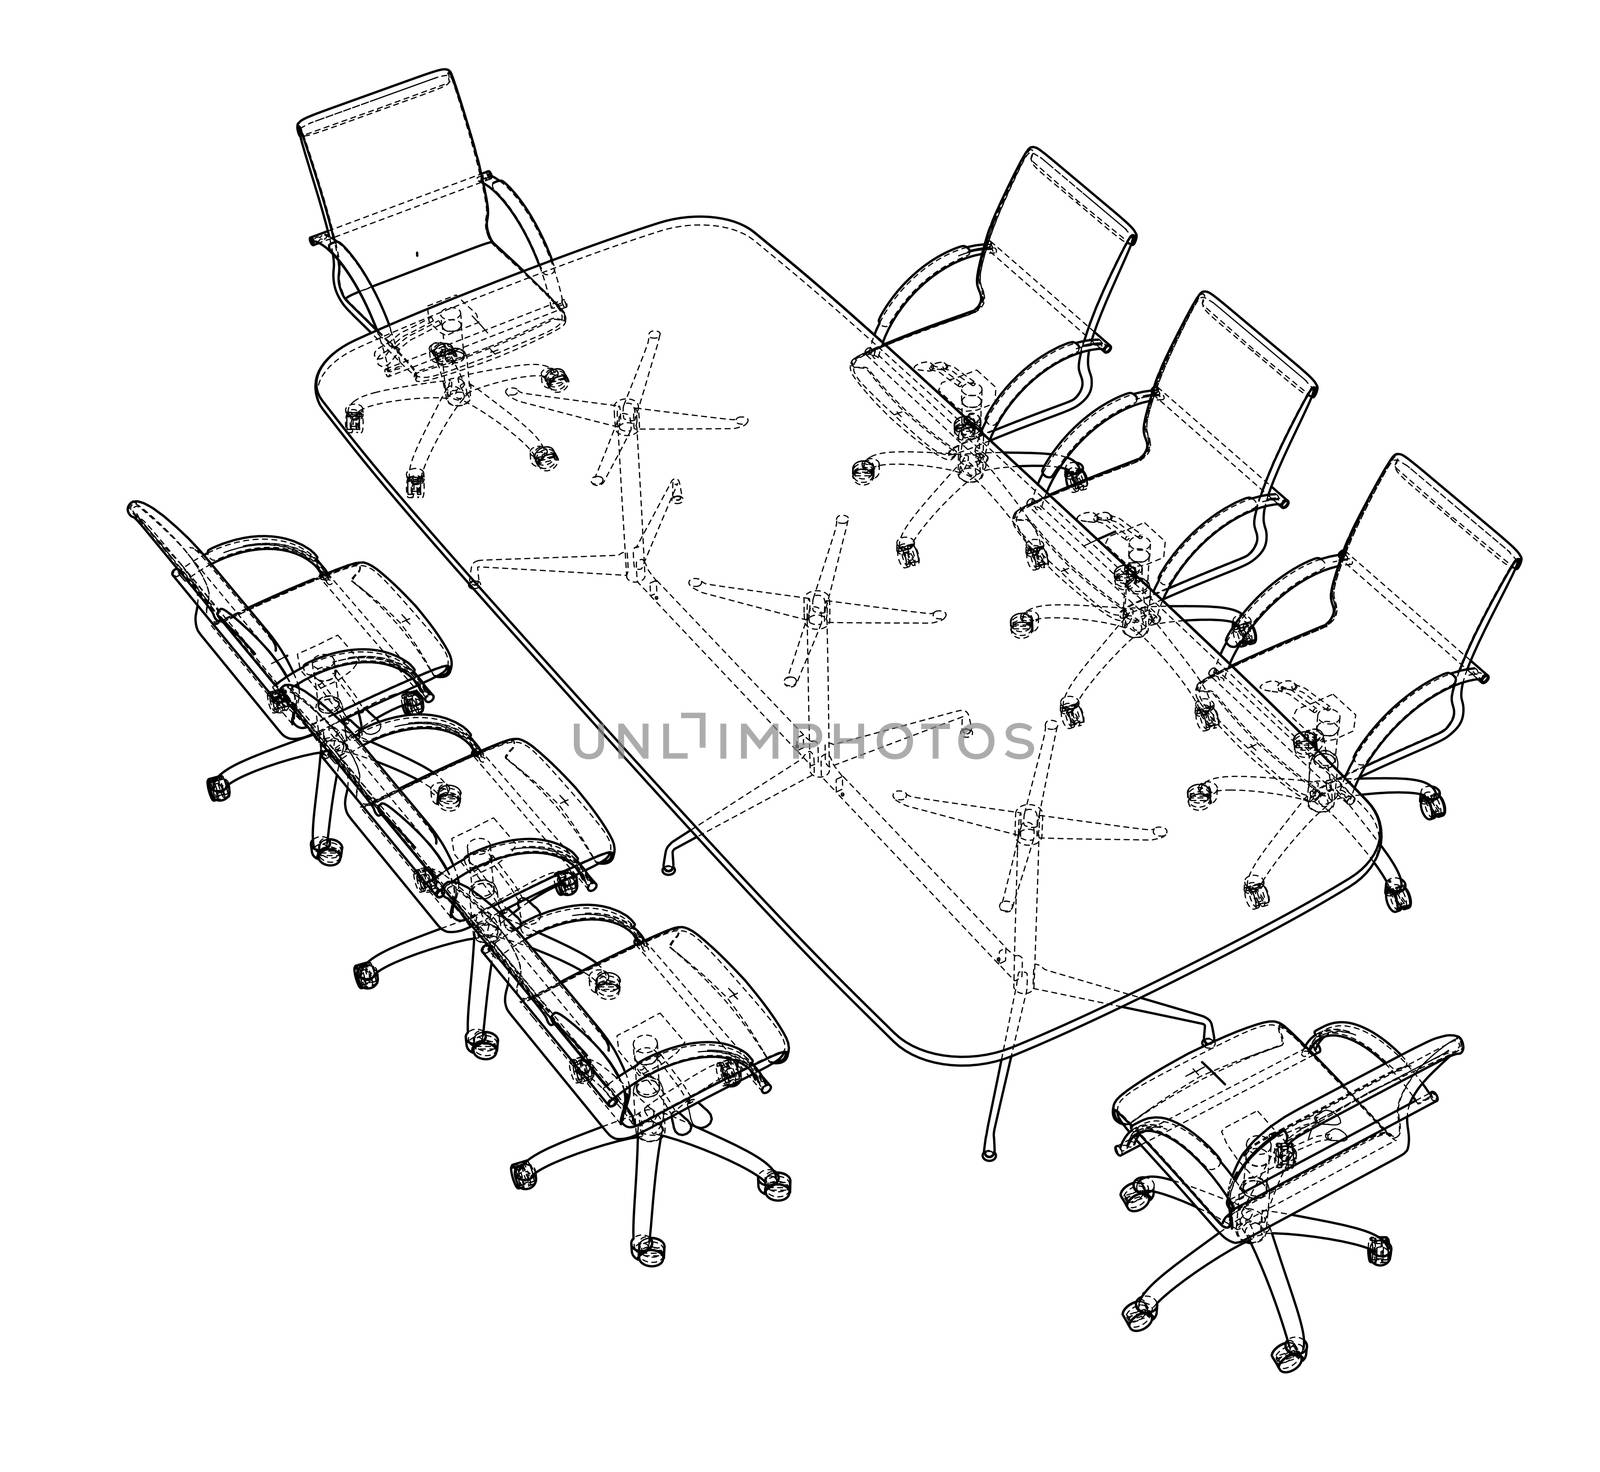 Conference table with chairs in sketch style. 3d illustration